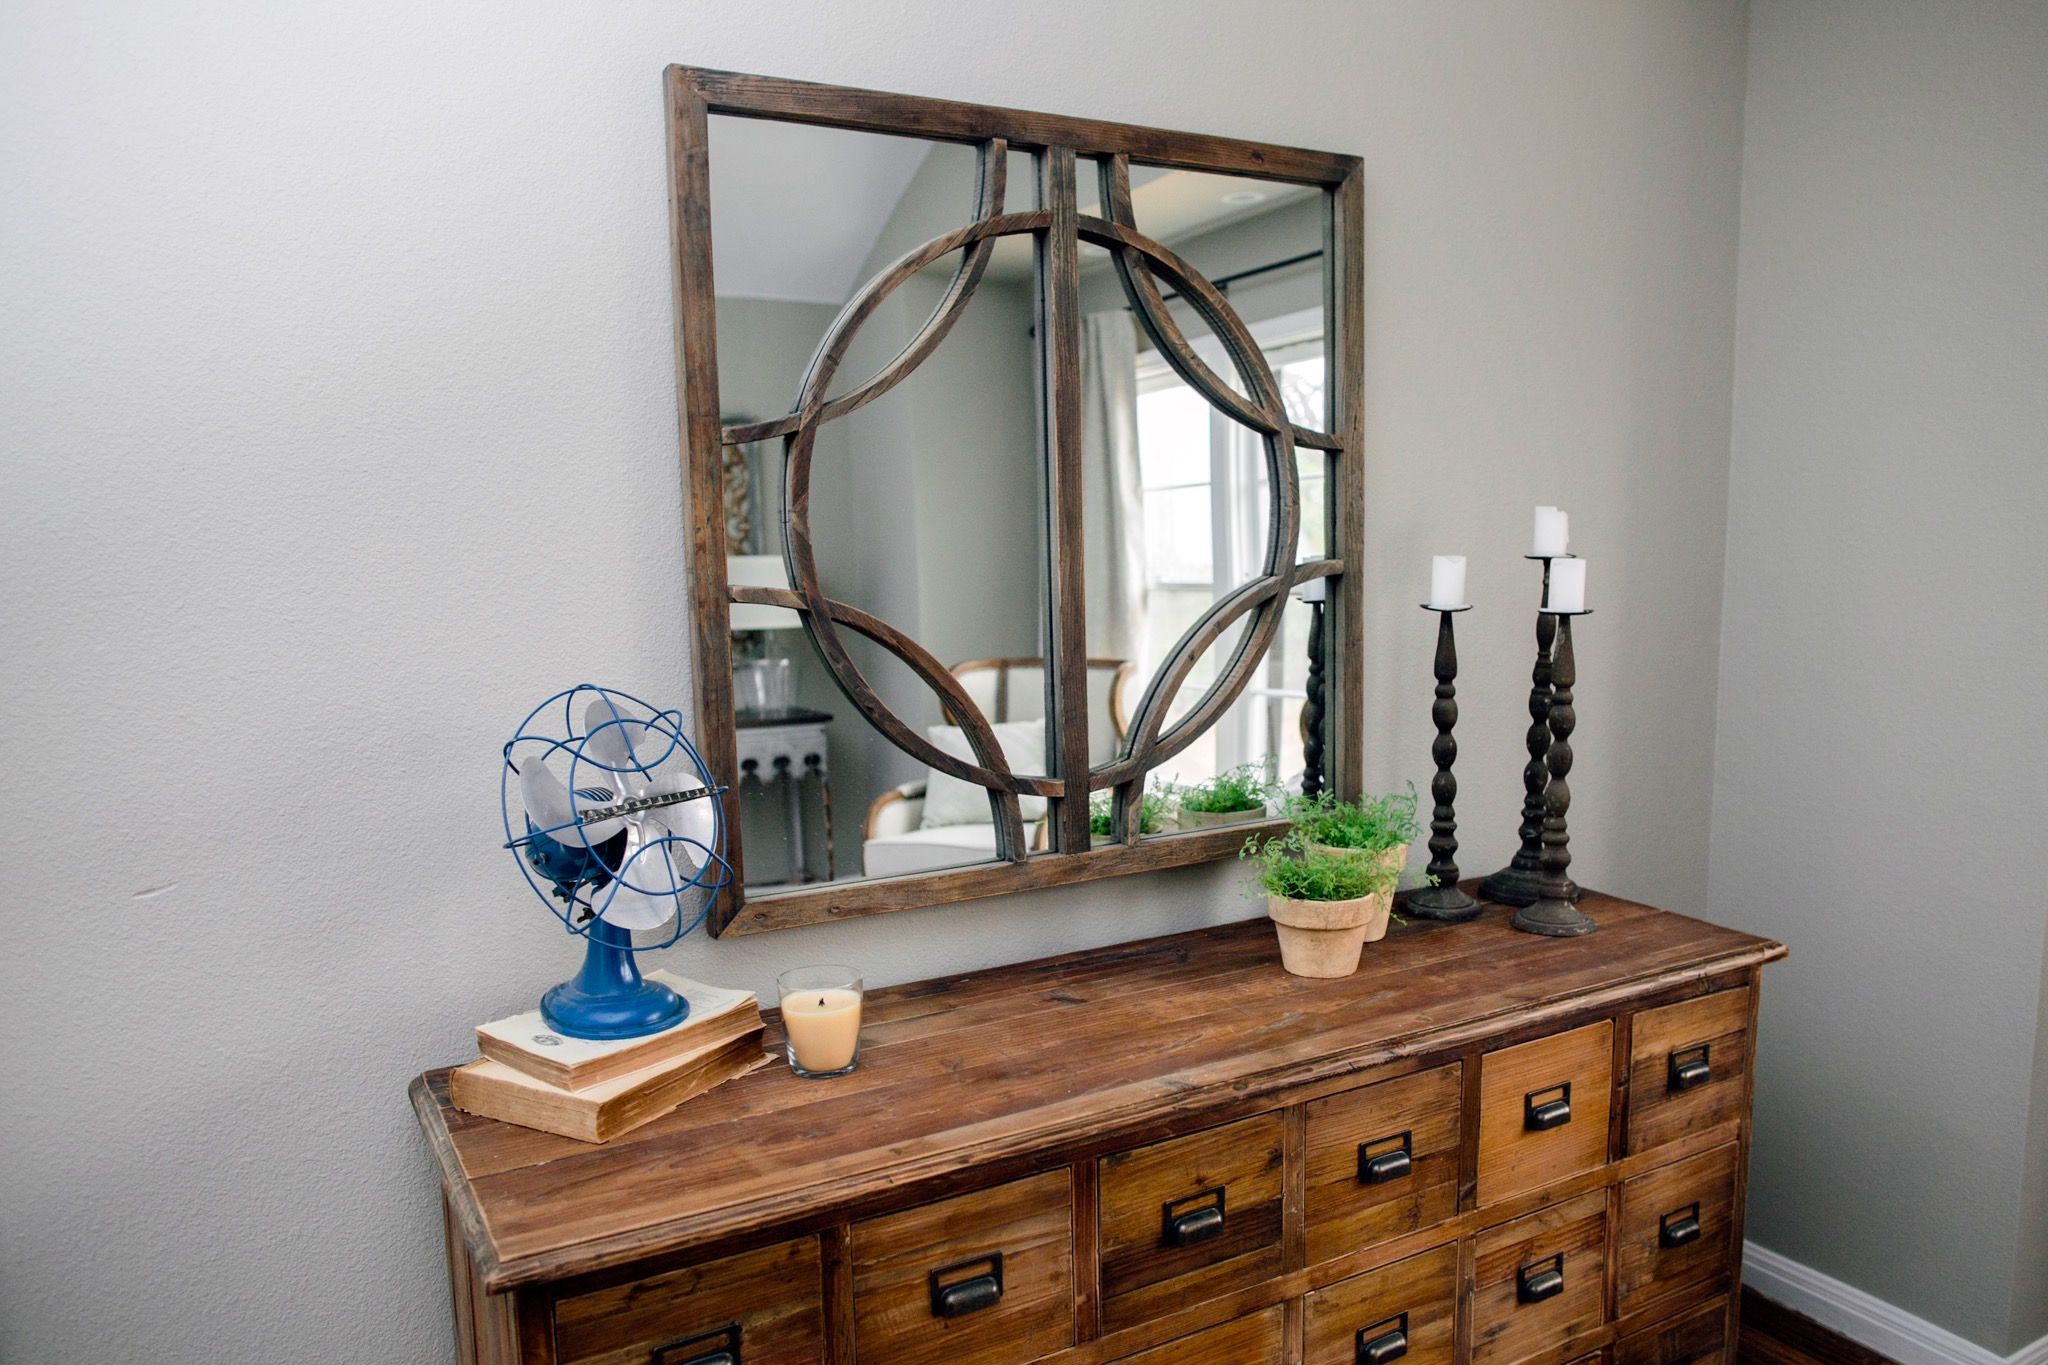 Wooden Vintage Bedroom Mirror And Cabinet Decor (View 18 of 20)